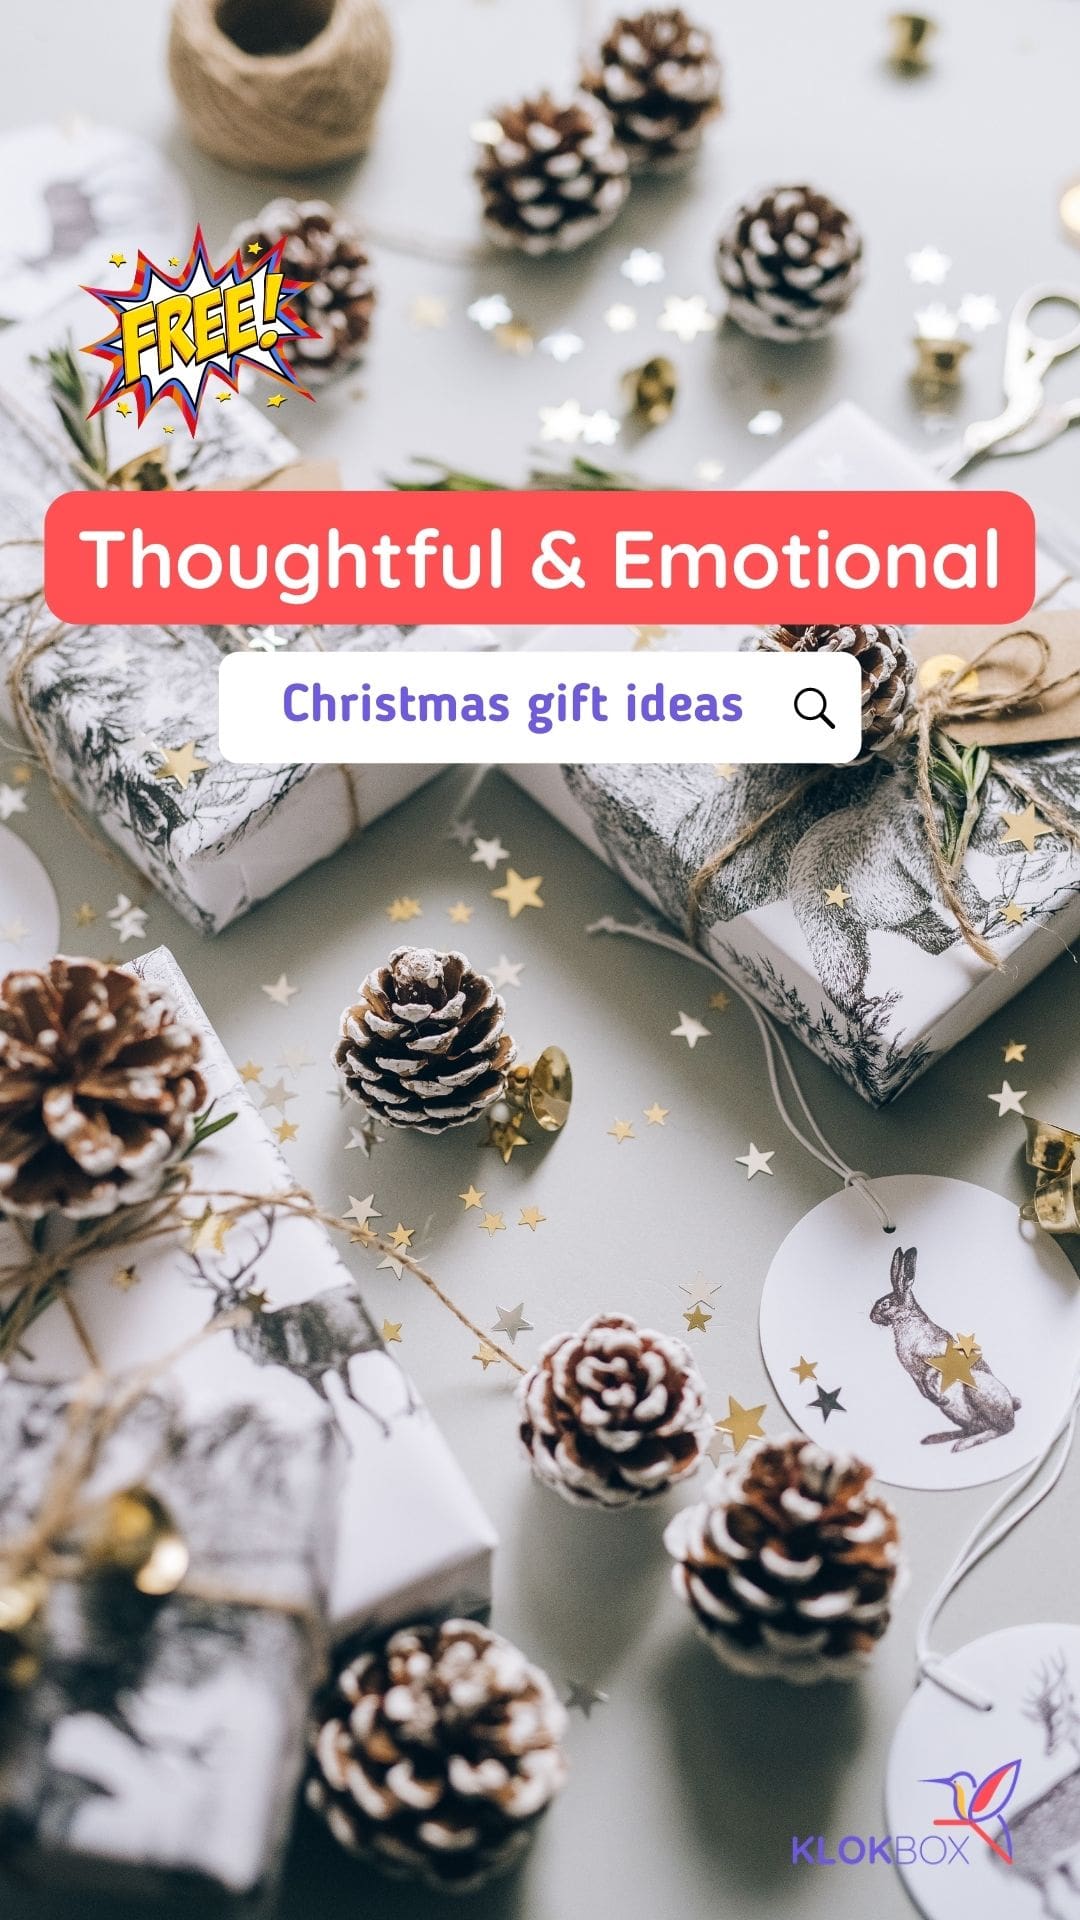 Free Thoughtful and Emotional Christmas Gift Ideas